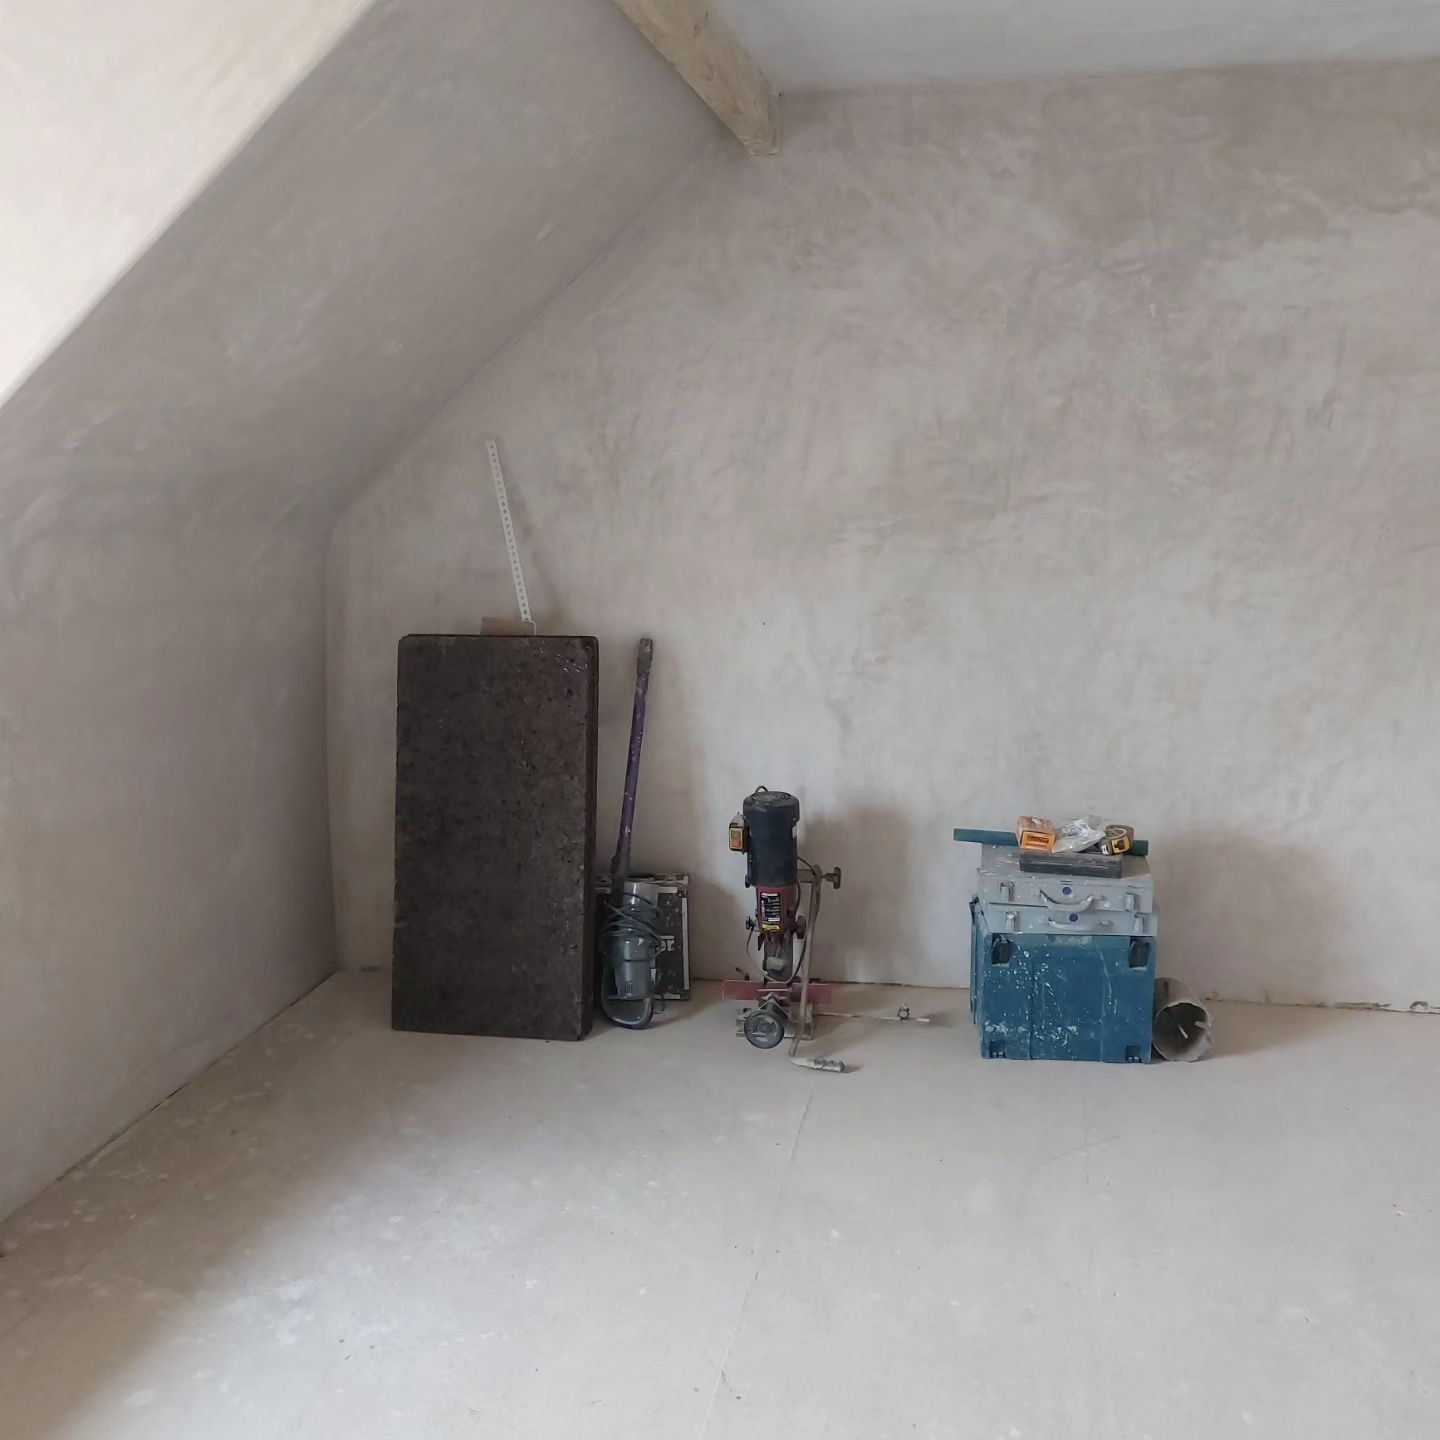 H E R I T A G E  P L A S T E R. . .

#limeplaster is perfect for old solid stone buildings:

💨 Breathability: allows proper ventilation and prevents moisture damage.

💪 Flexibility: Adapts to structural shifts, minimising cracks and damages.

👁 Na